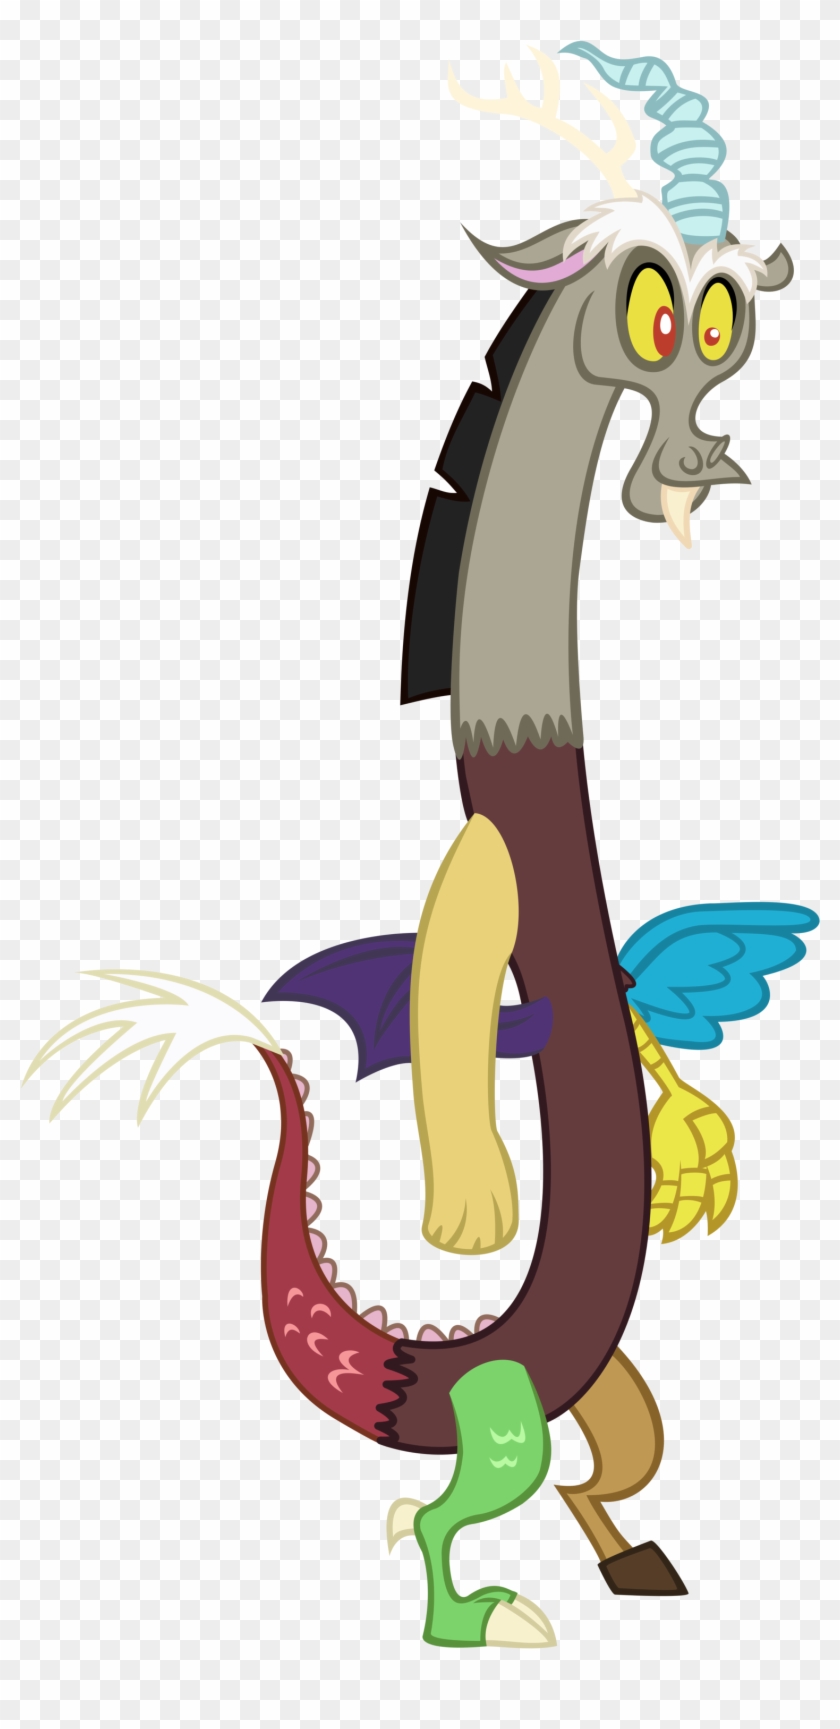 Discord - Discord From My Little Pony #345218